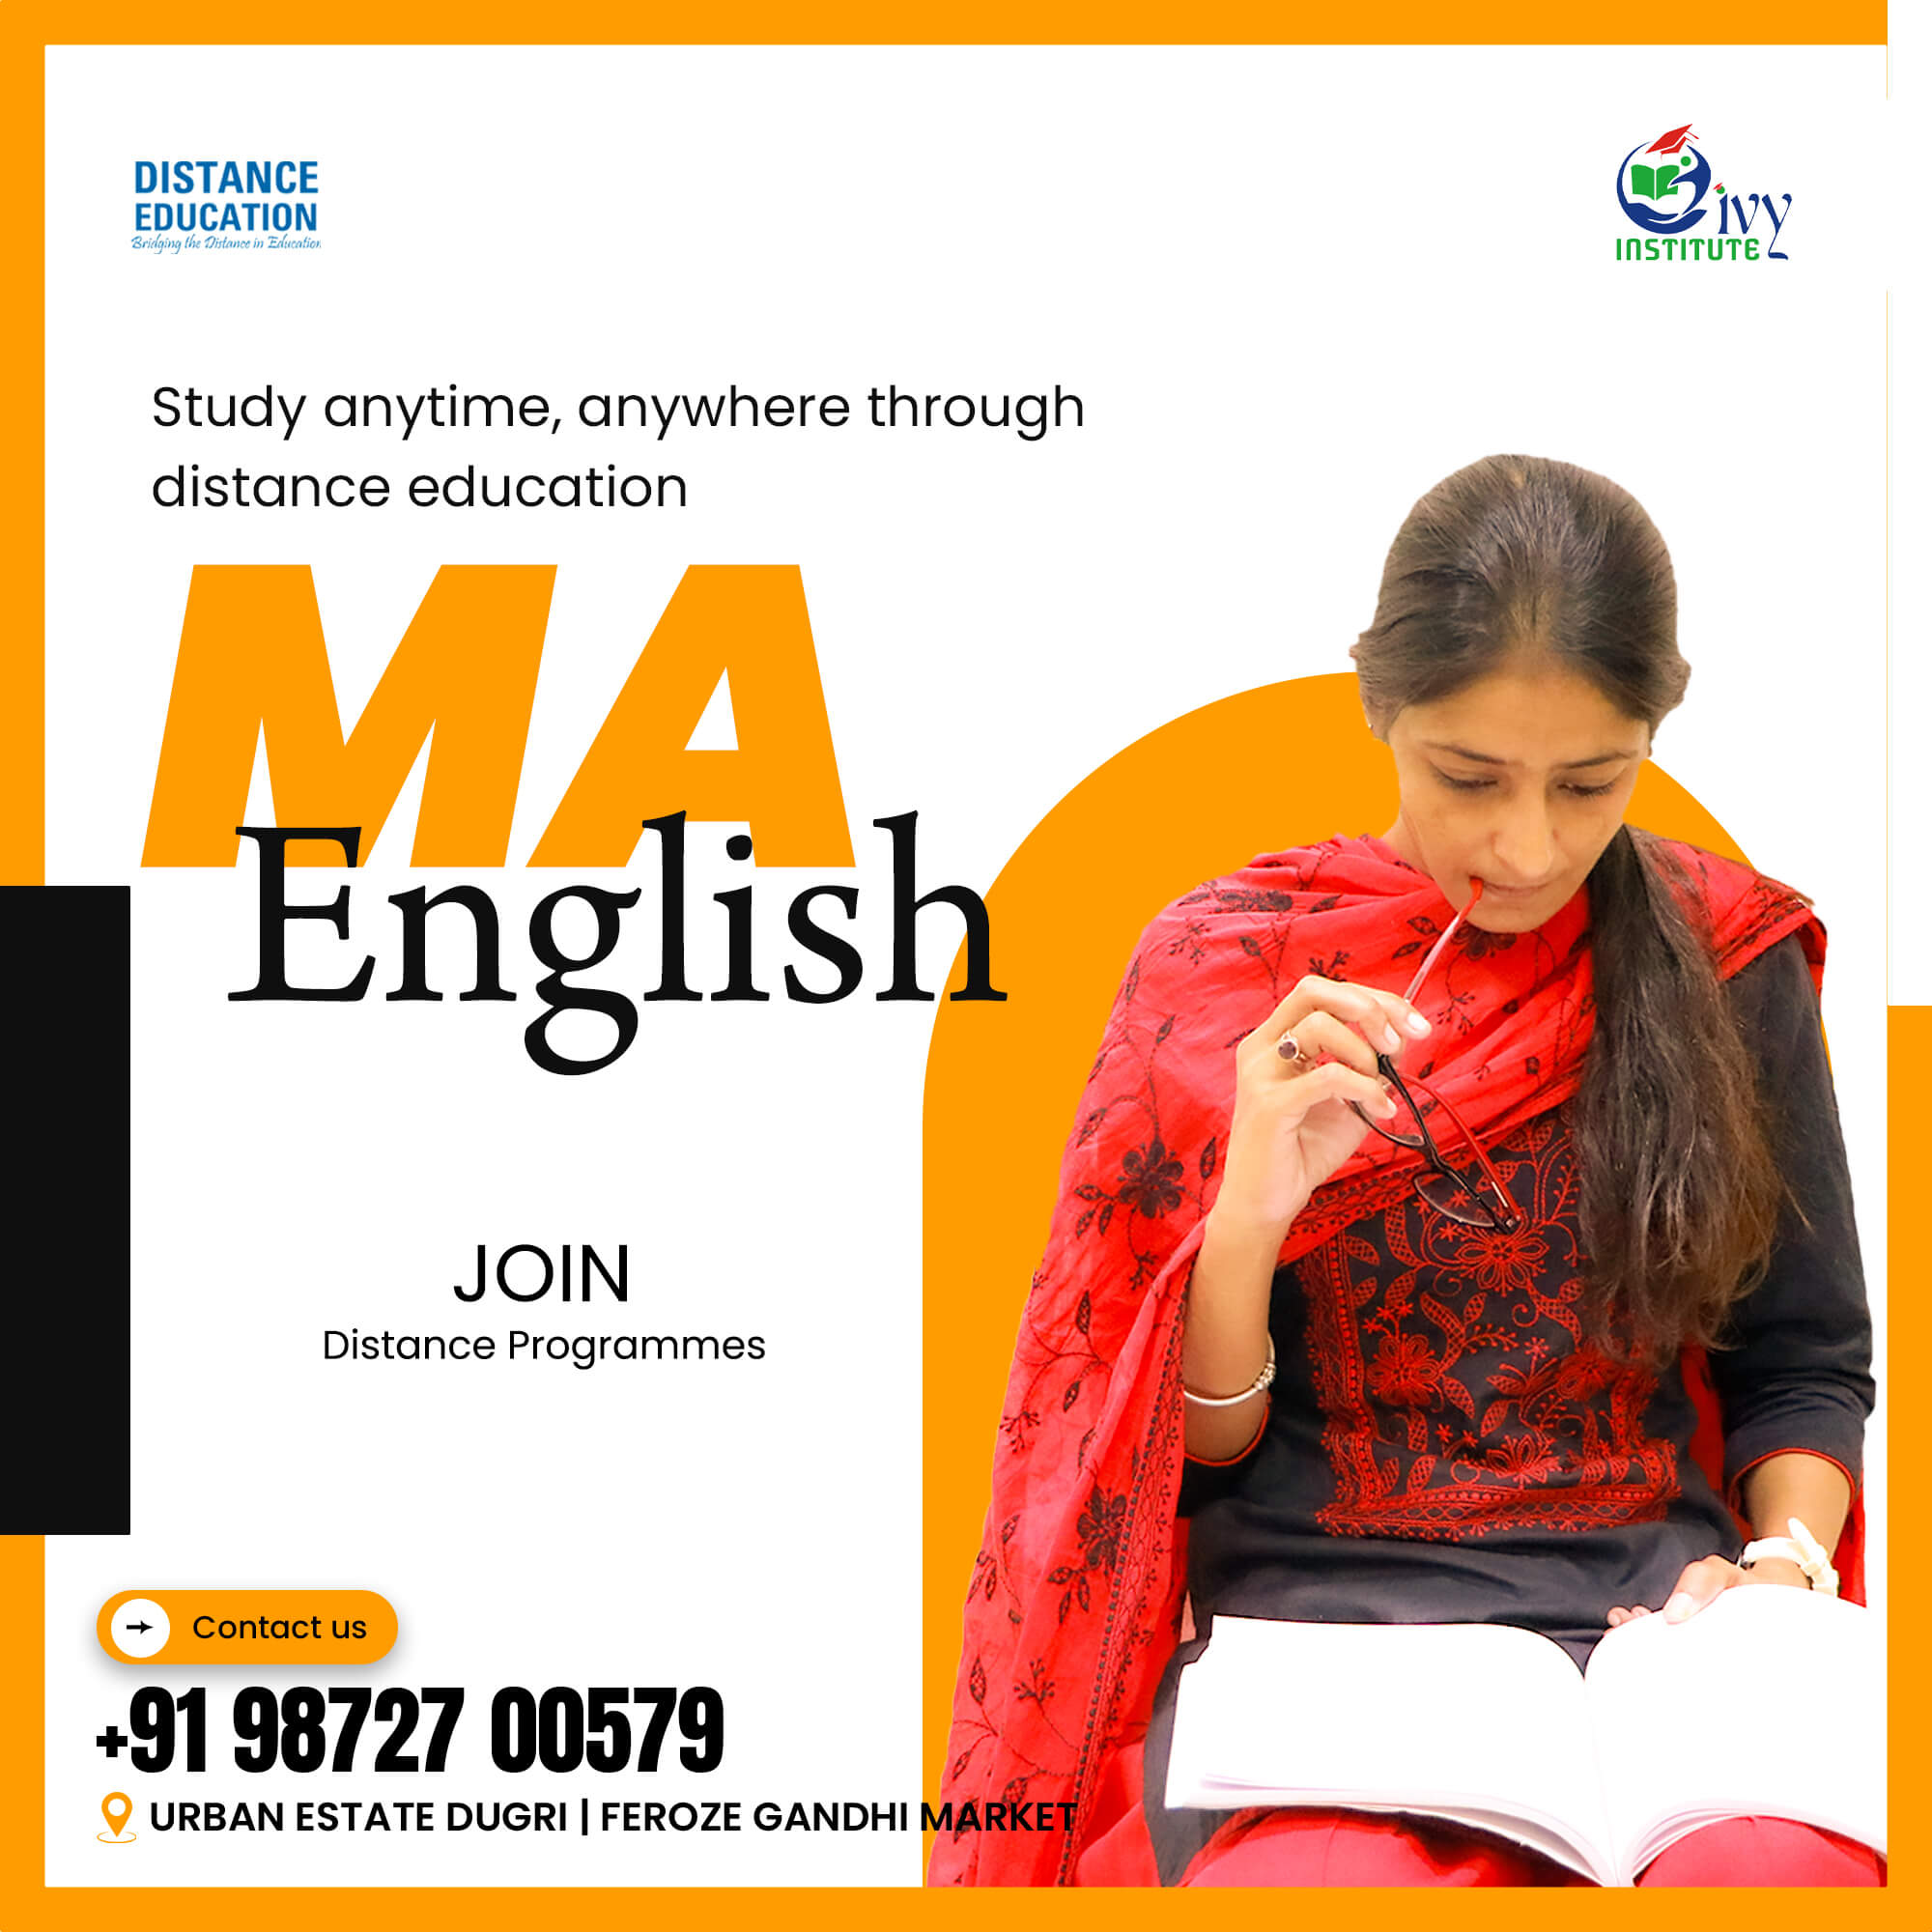 Join today to pursue MA in English